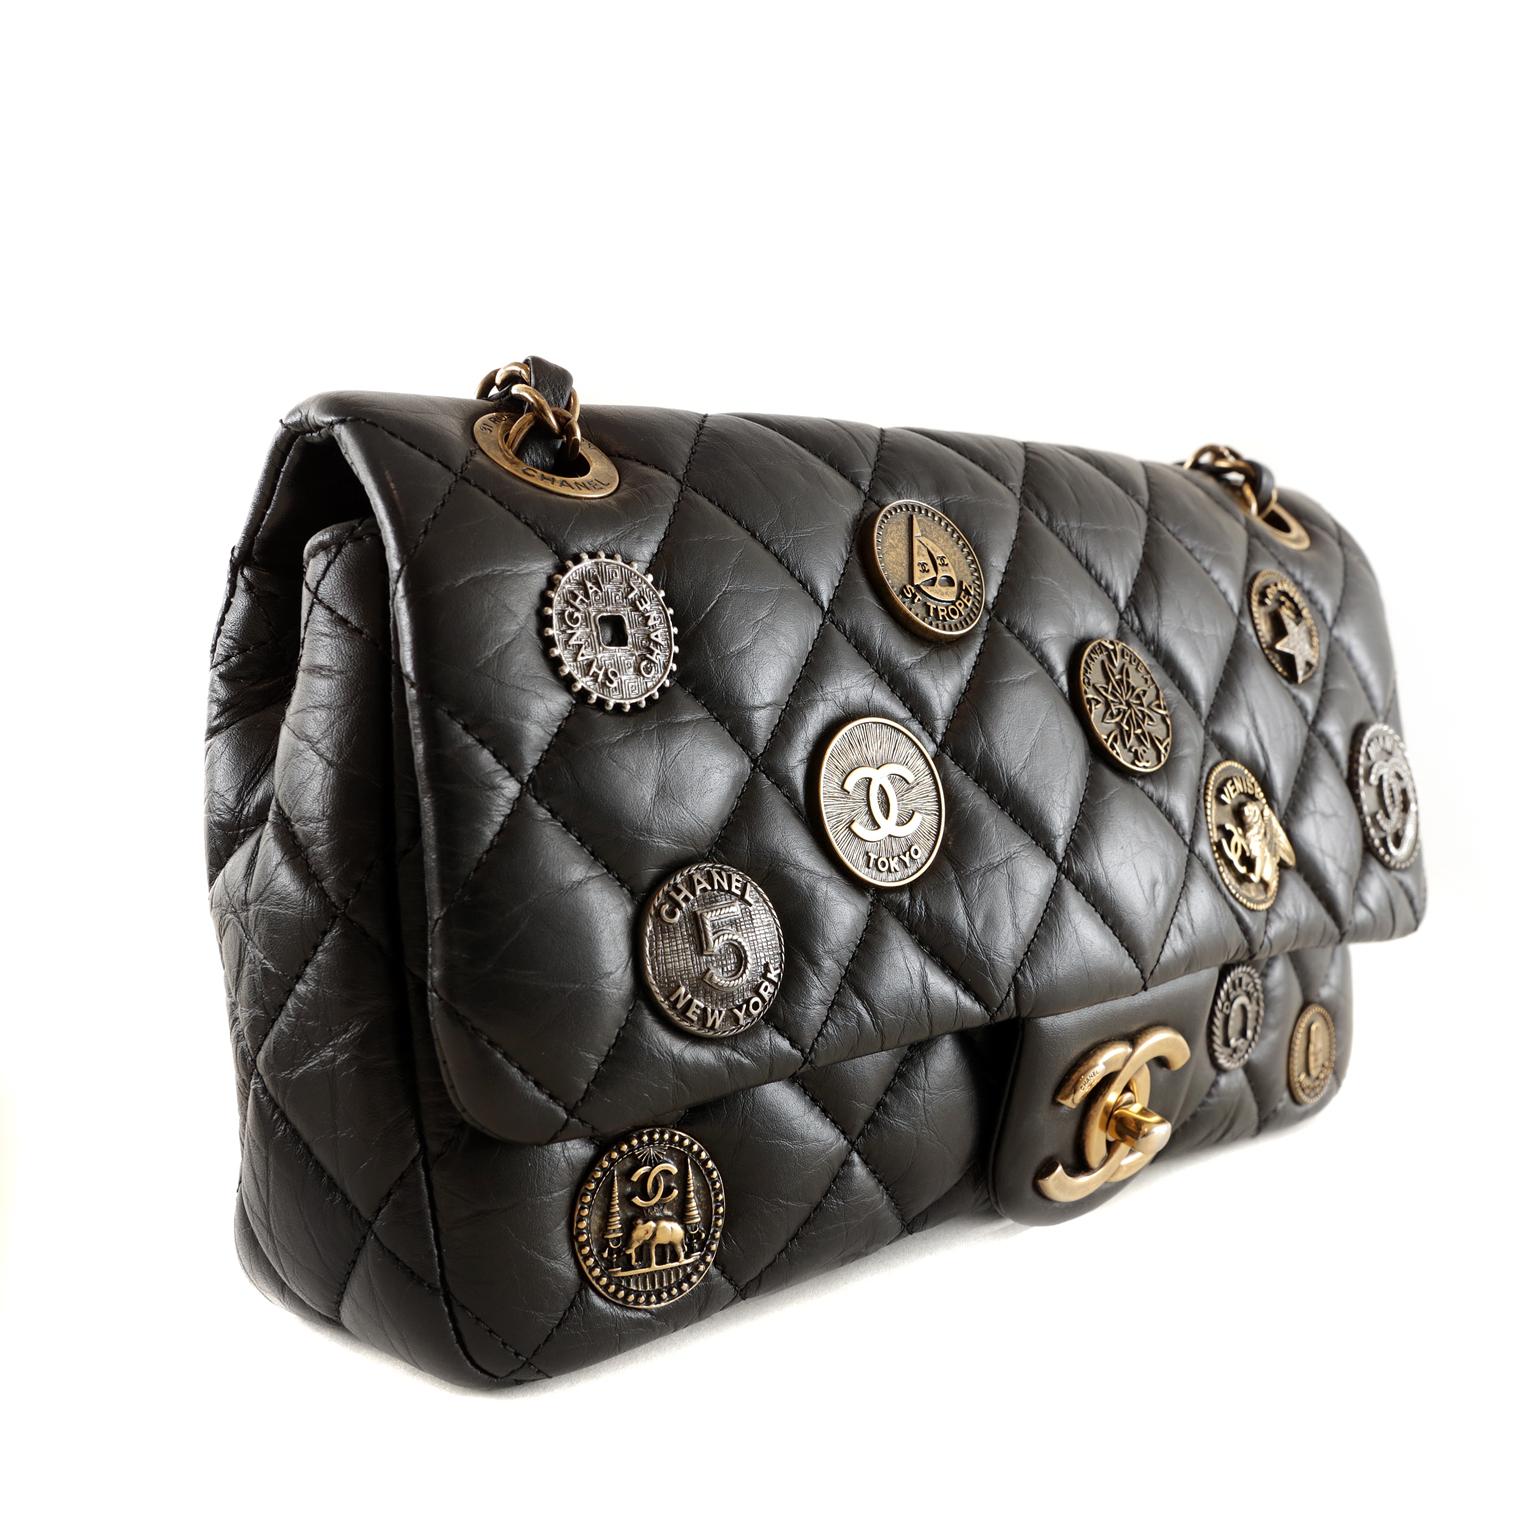 Chanel Black Calfskin Medallion Flap Bag - pristine condition, appearing never carried
 From the 2015 Cruise Collection. The edgy style features the Chanel classic silhouette embellished with multiple metallic medallions.    
Black aged calfskin is